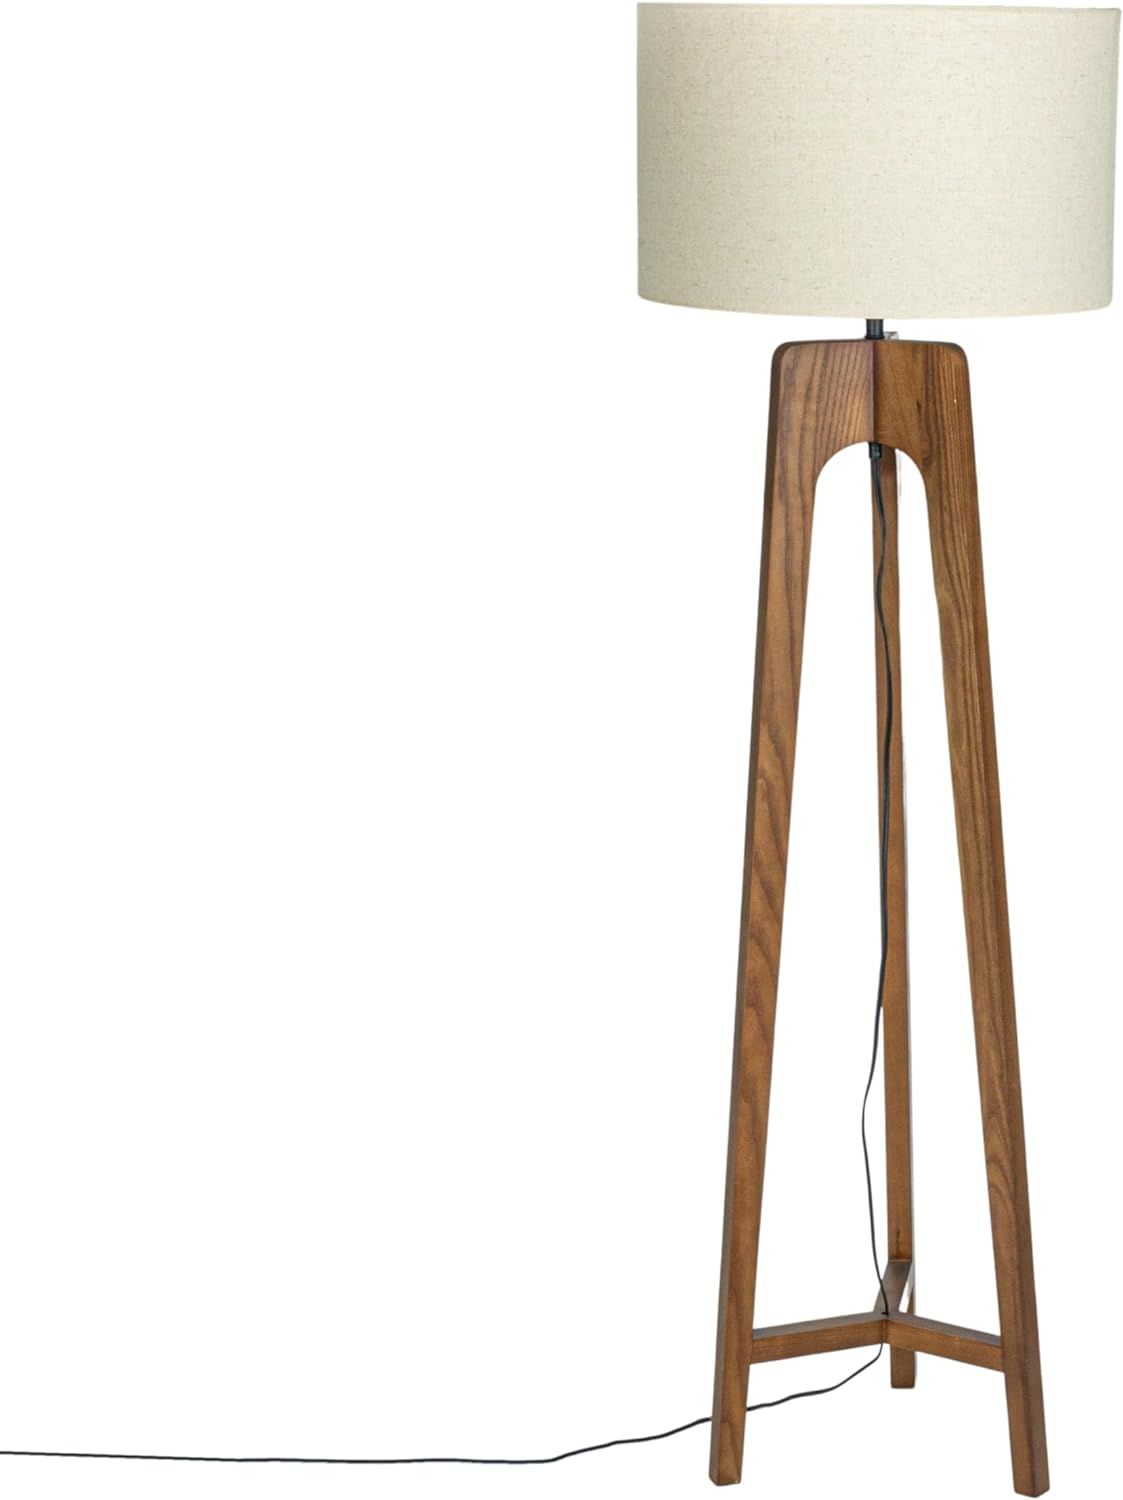 Bloomingville Round Rubberwood Tripod Floor Lamp with Linen Shade, Natural | Amazon (US)